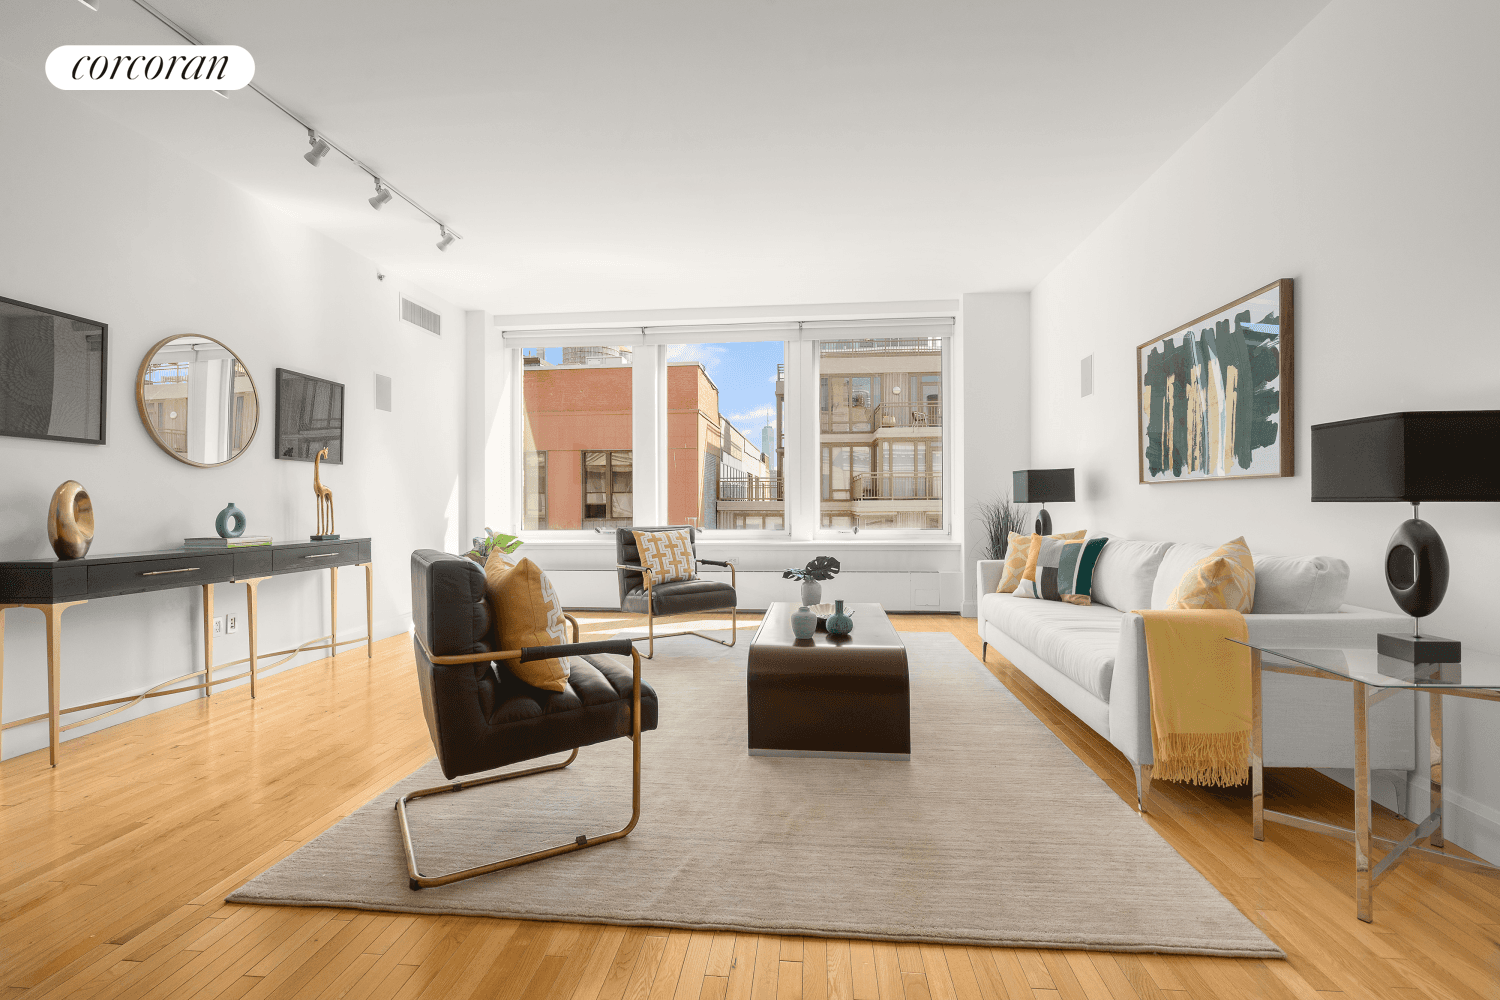 New Price ! Welcome to 121 West 19th Street, 9E, a sun drenched, 1529 sq ft 1 bedroom 1 interior bedroom den home office and 2 full bathroom condo with ...